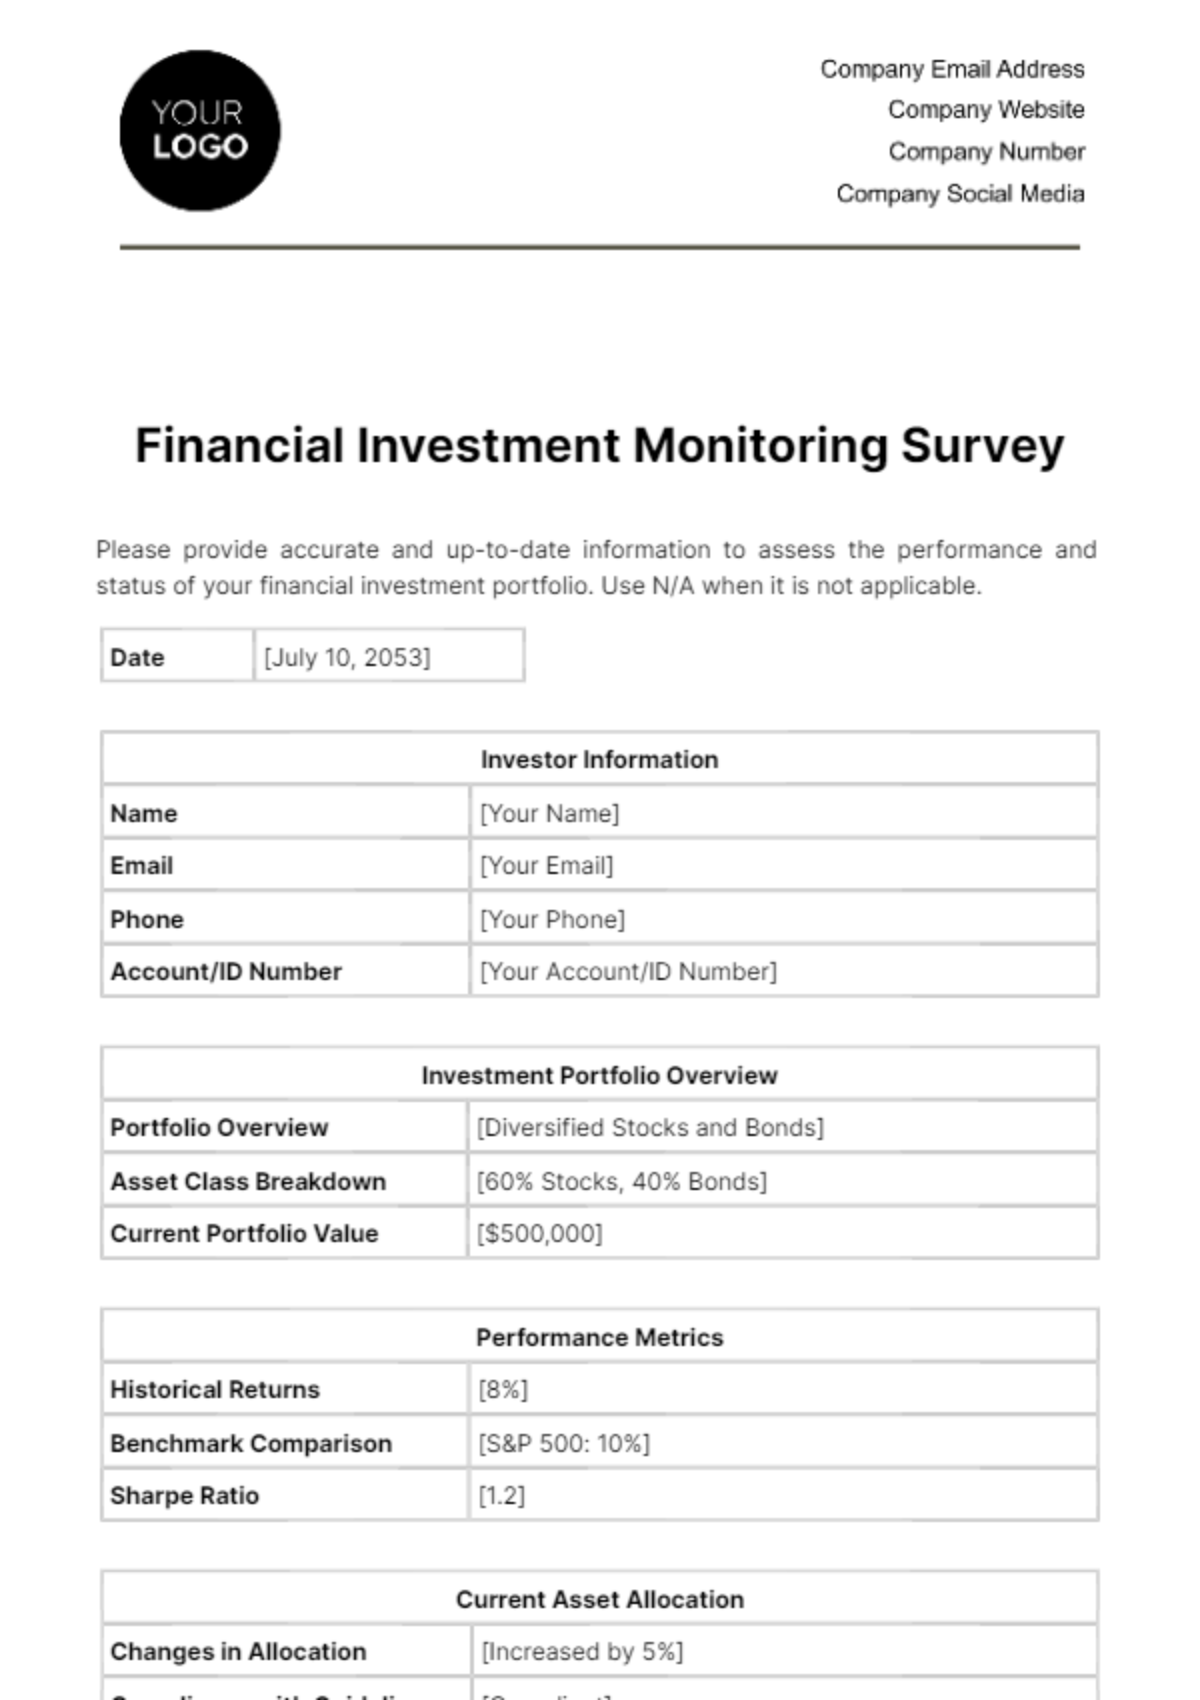 Financial Investment Monitoring Survey Template